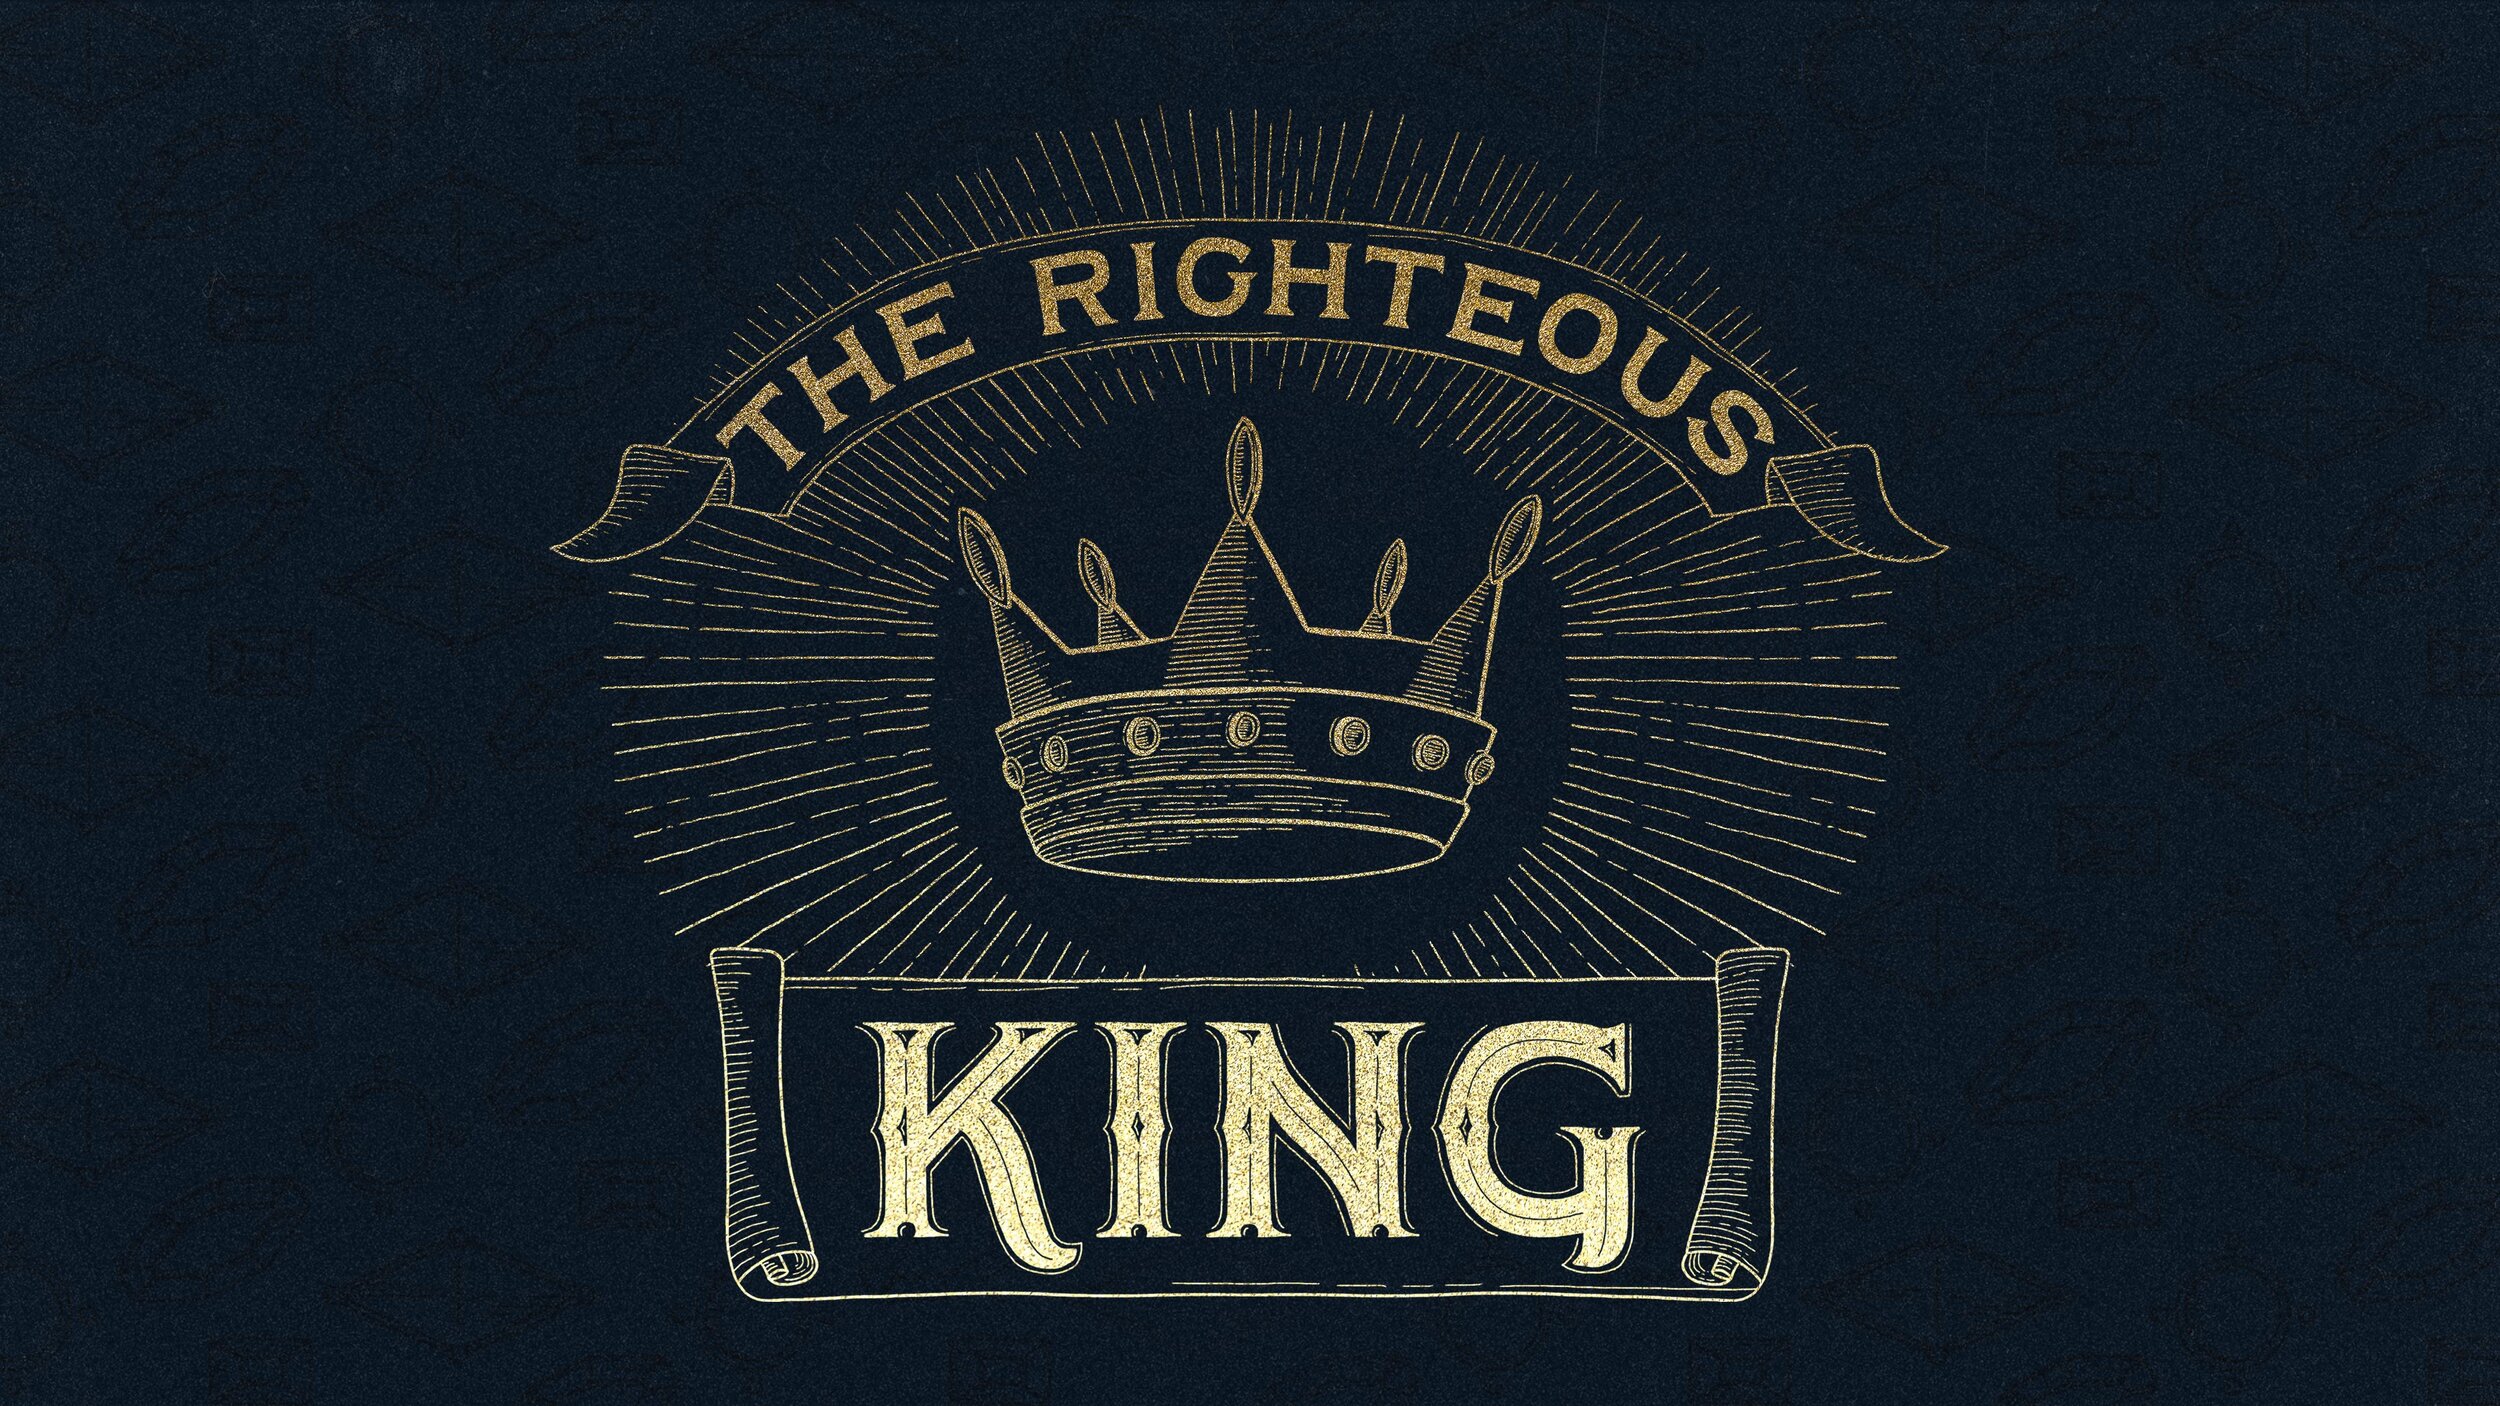 The Righteous King